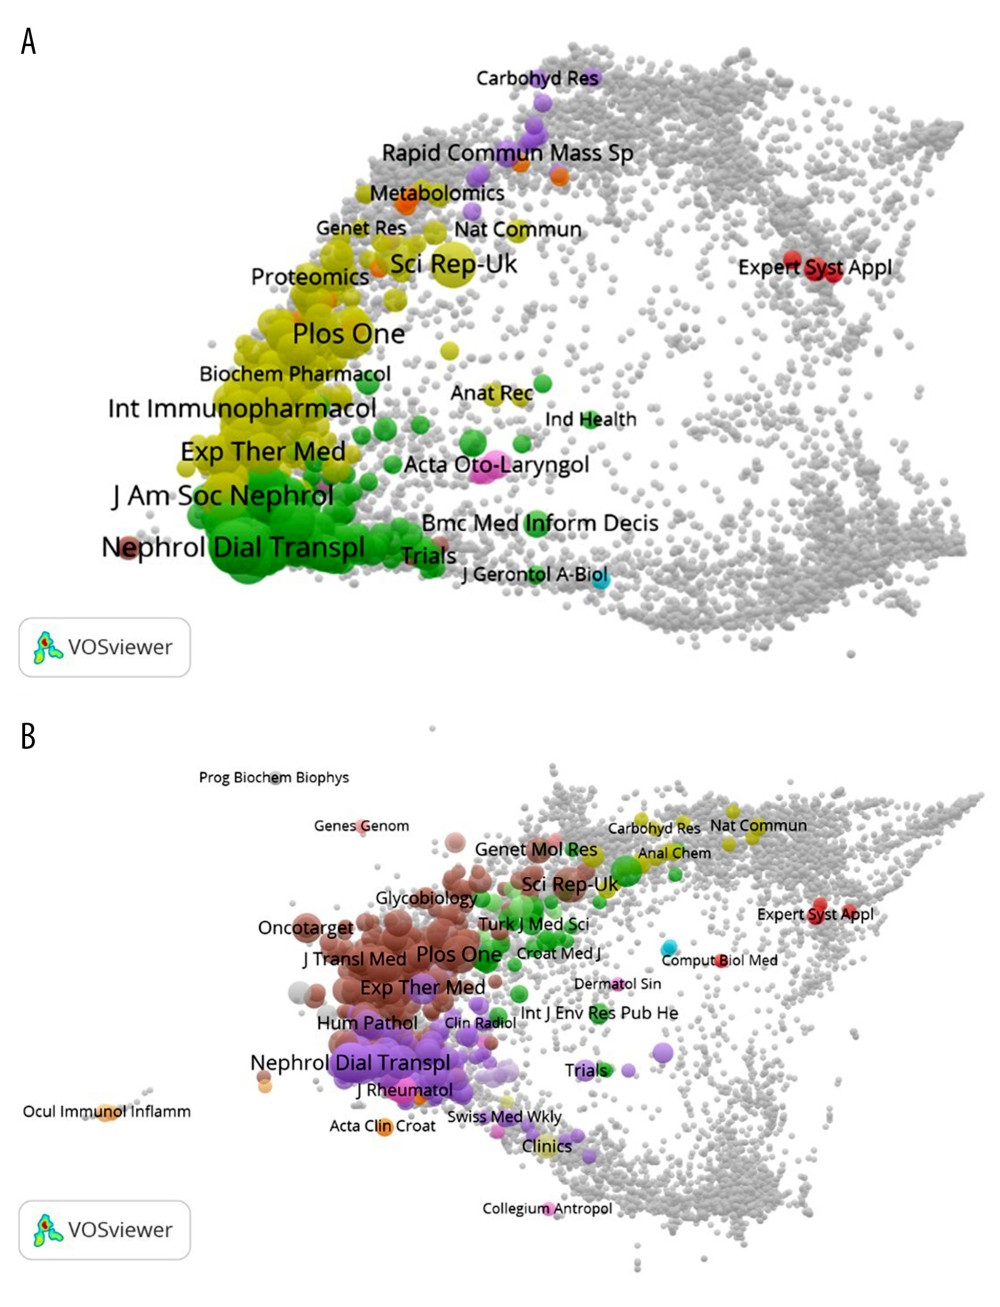 (A) The overlay map of journals related to IgA nephropathy research. (B) The overlay map of cited journals related to IgA nephropathy research.